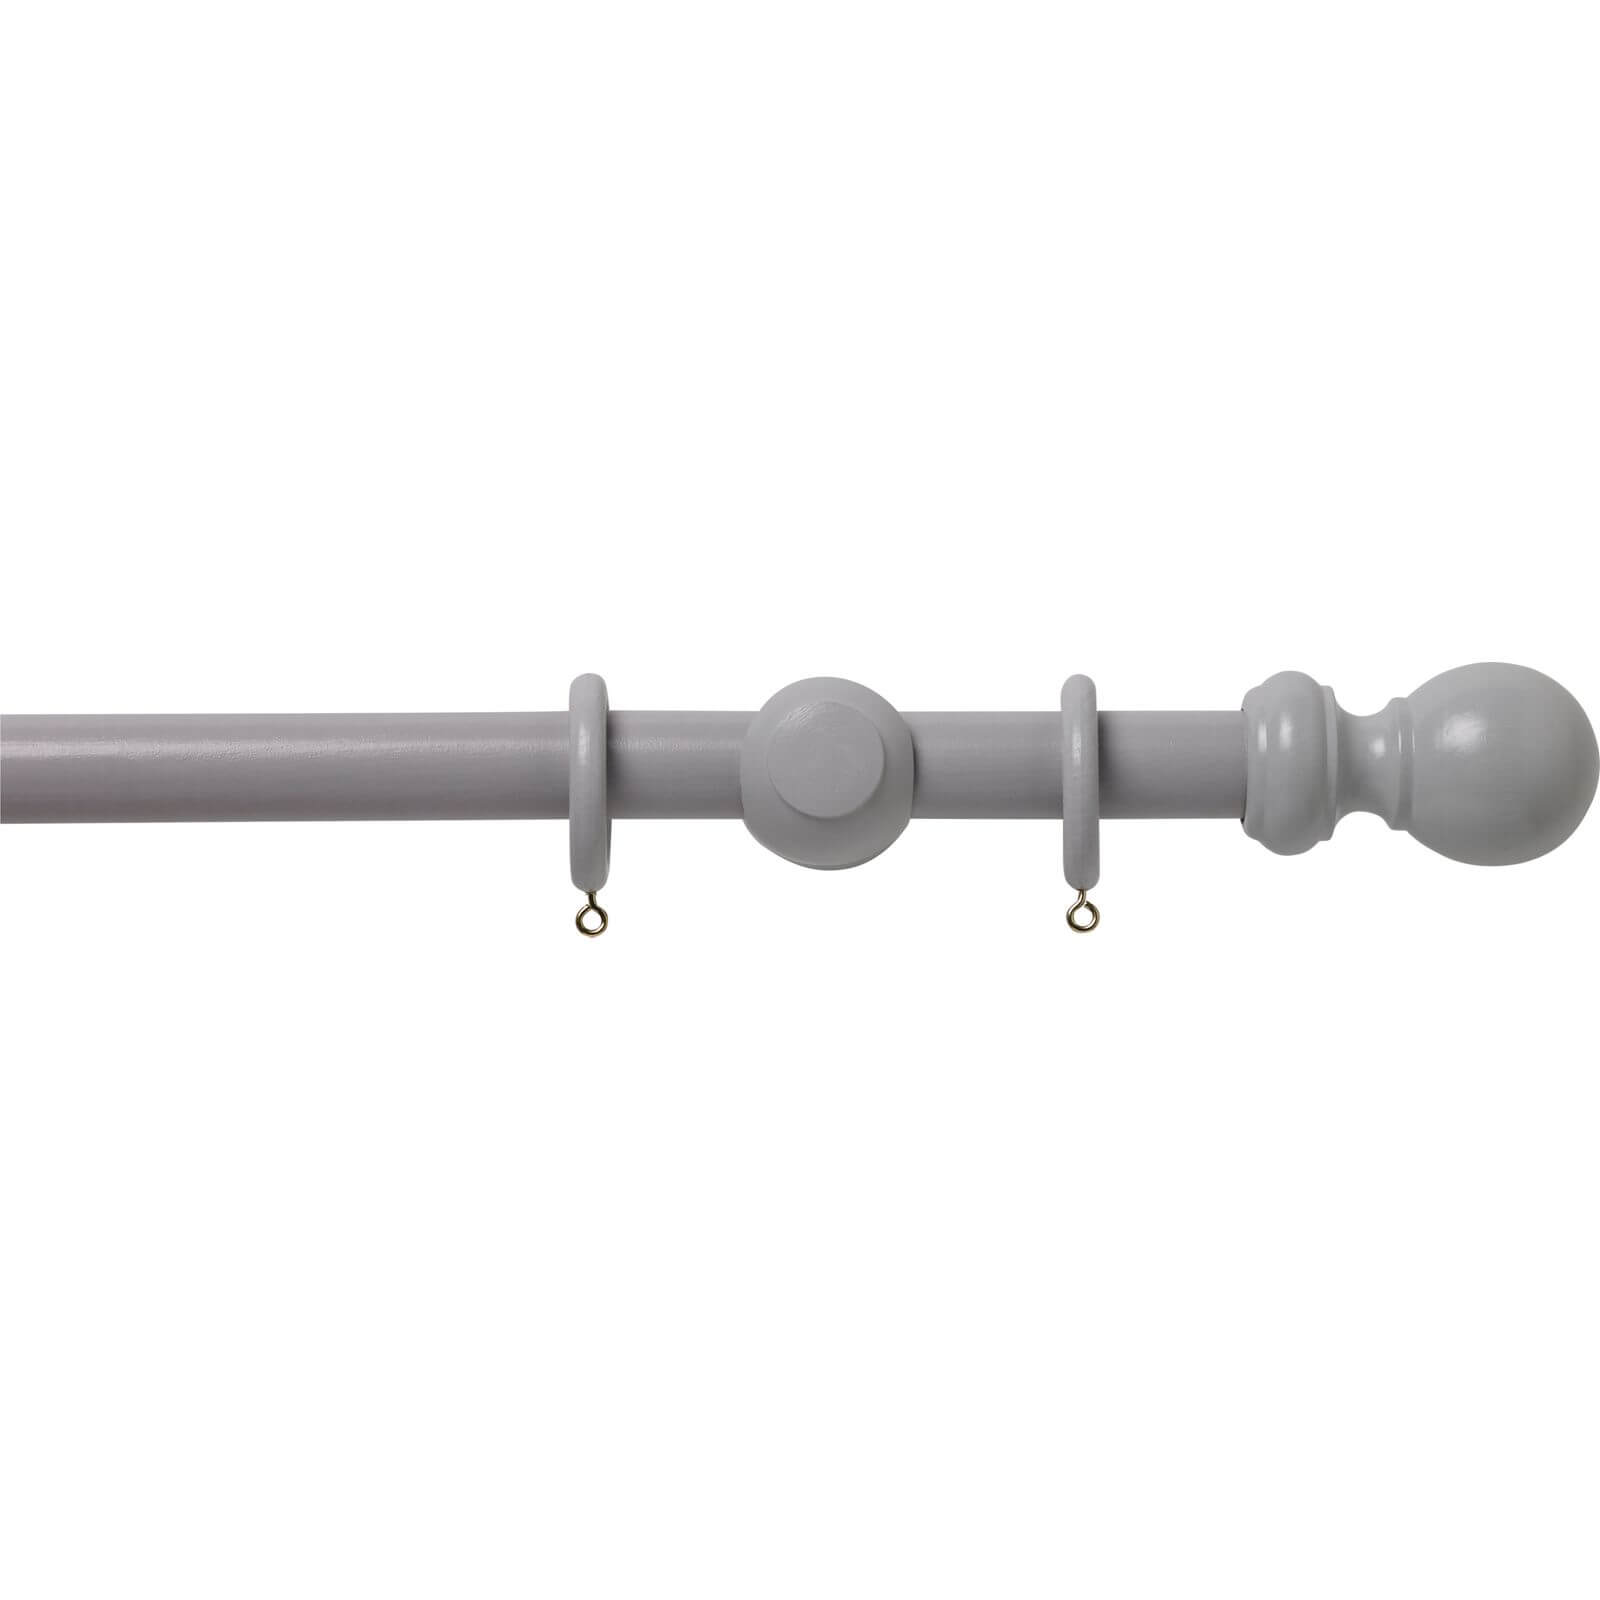 Grey Wood 28mm Curtain Pole with Ball Finials - 2.4m